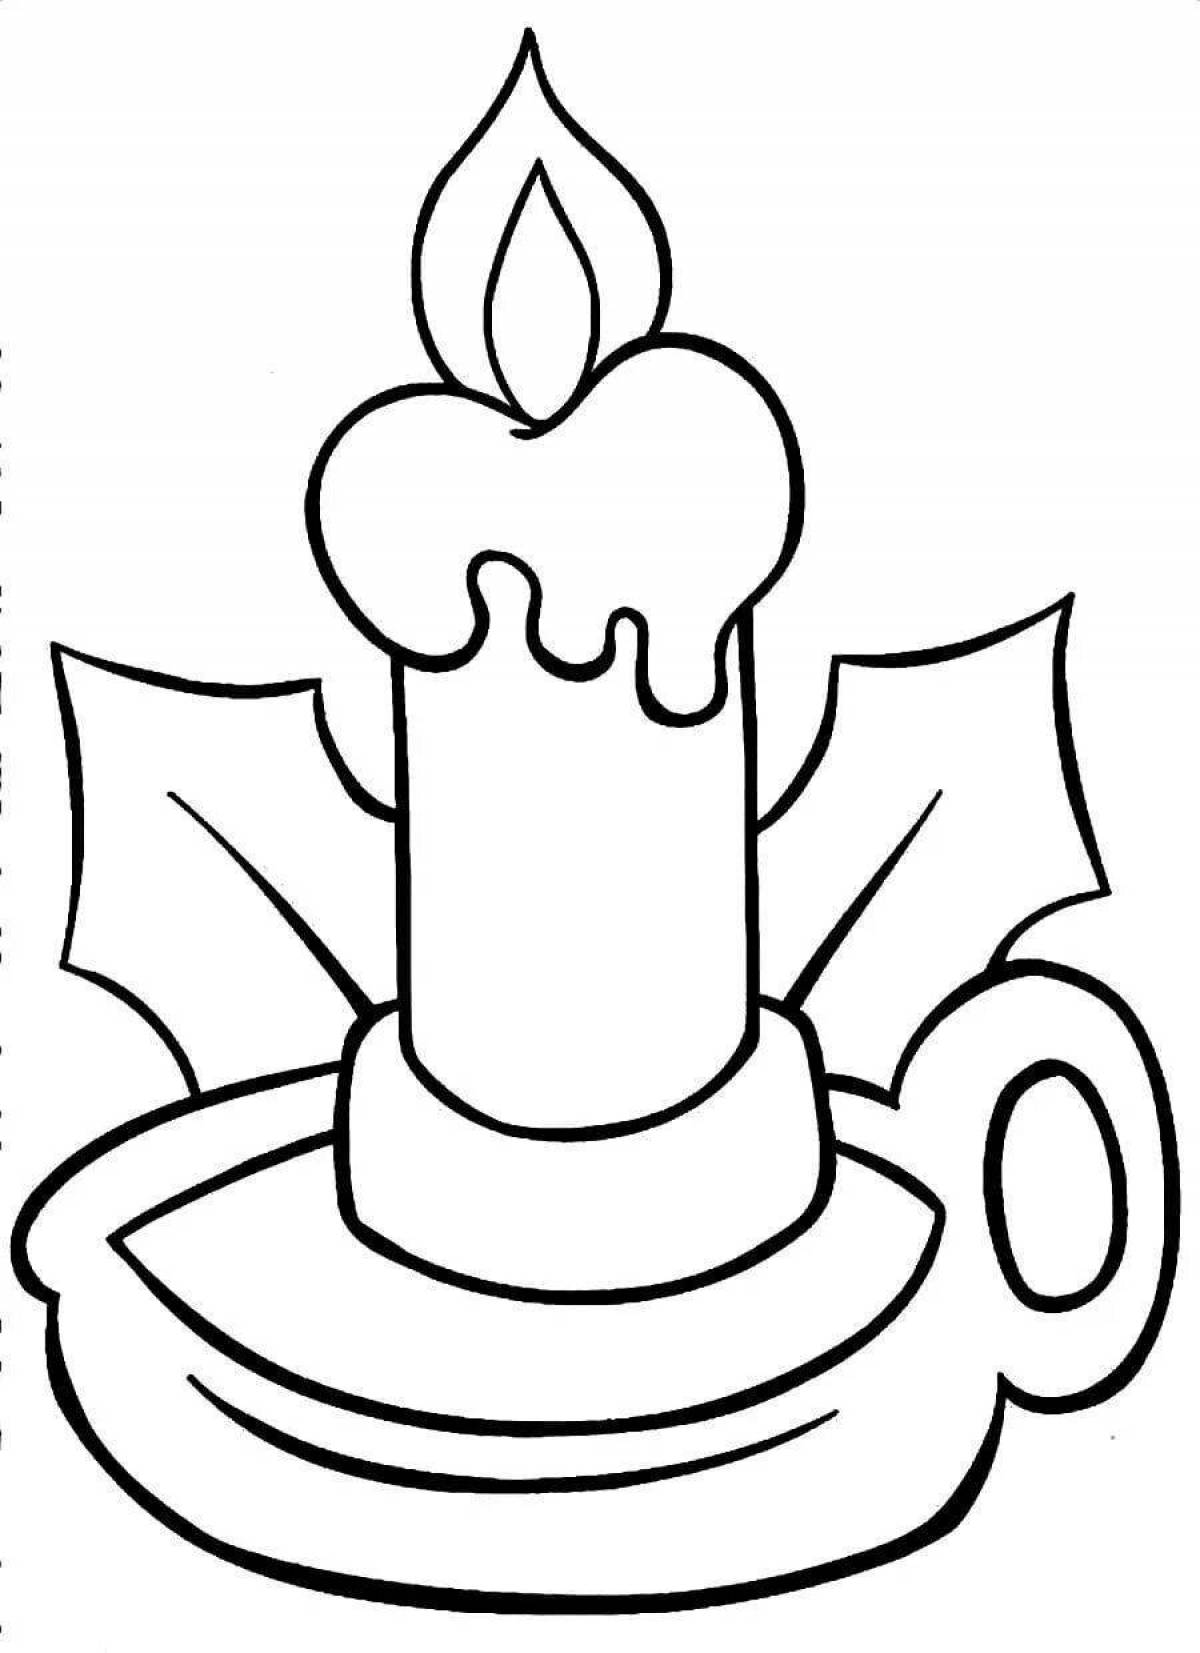 Great memory candle coloring book for babies